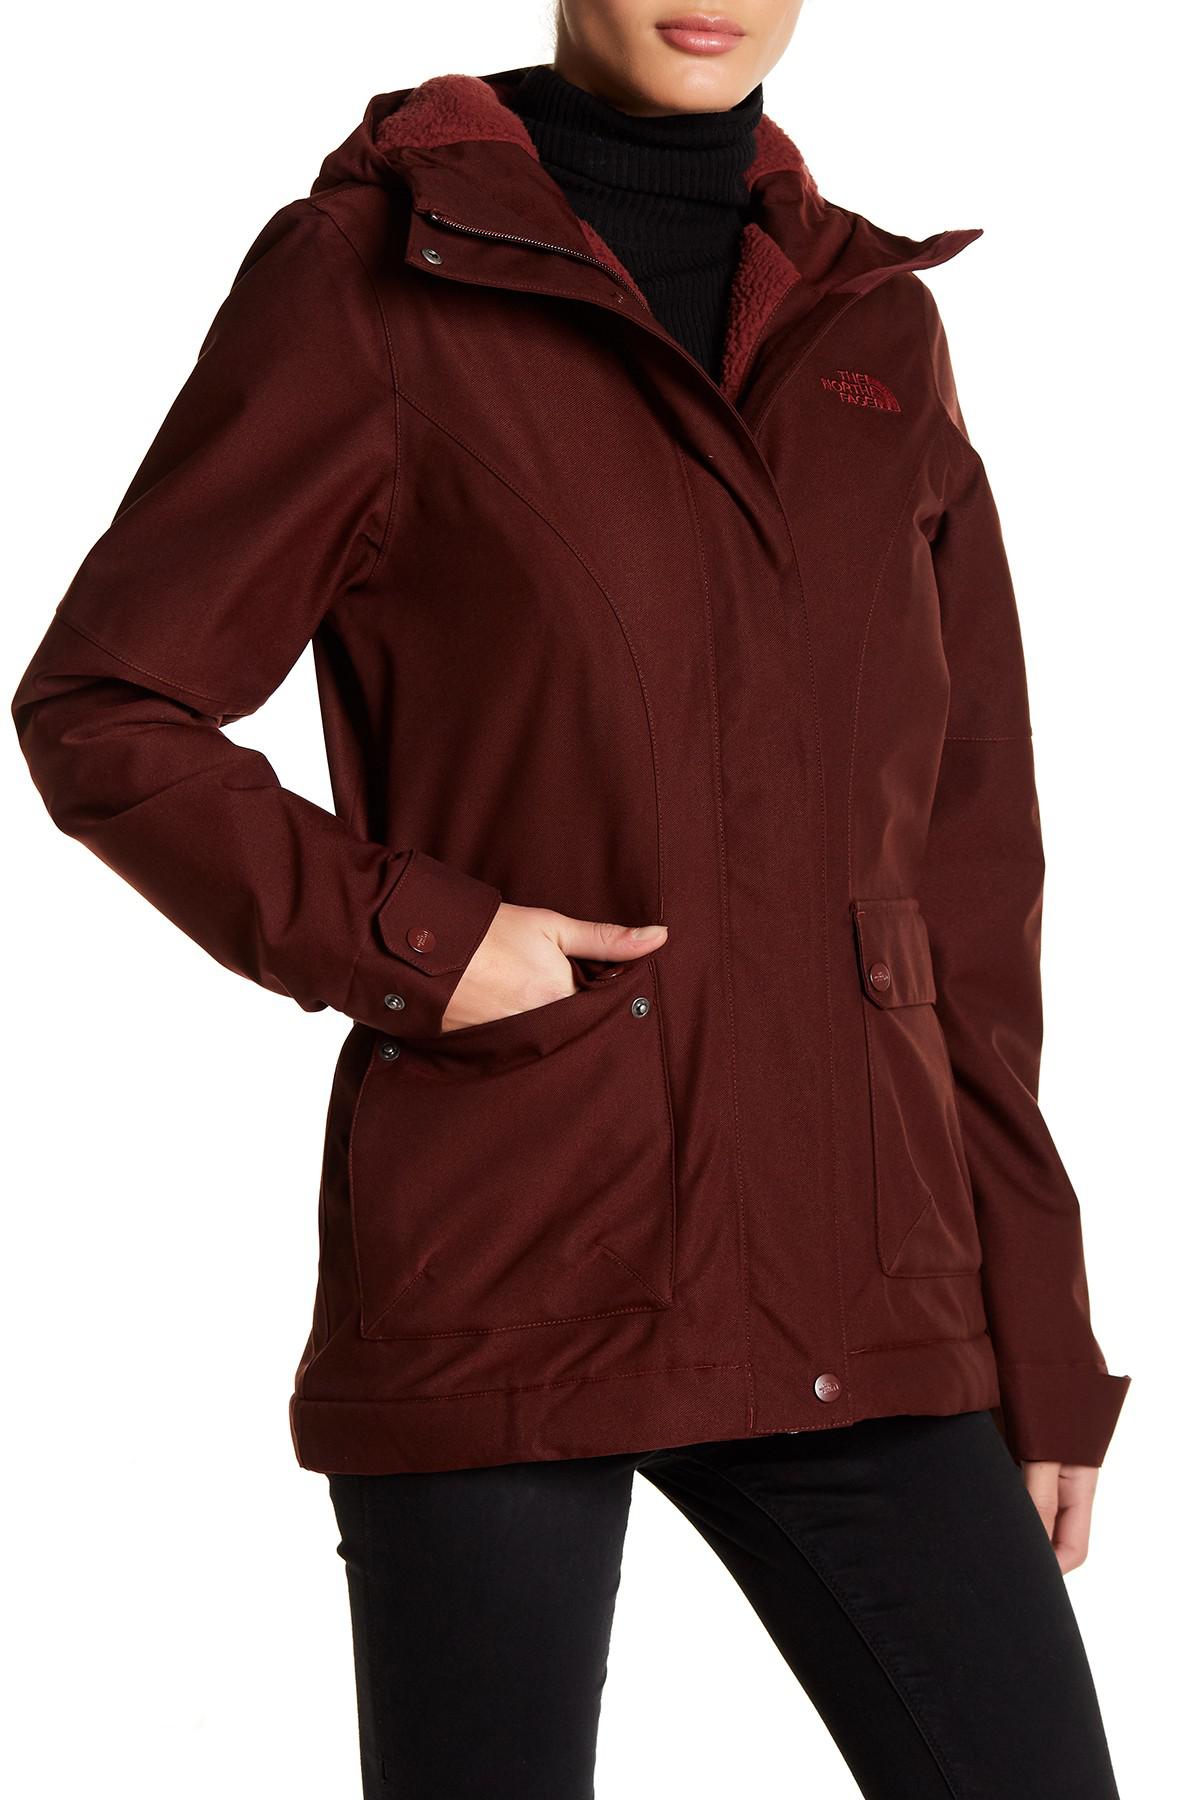 north face firesyde insulated jacket